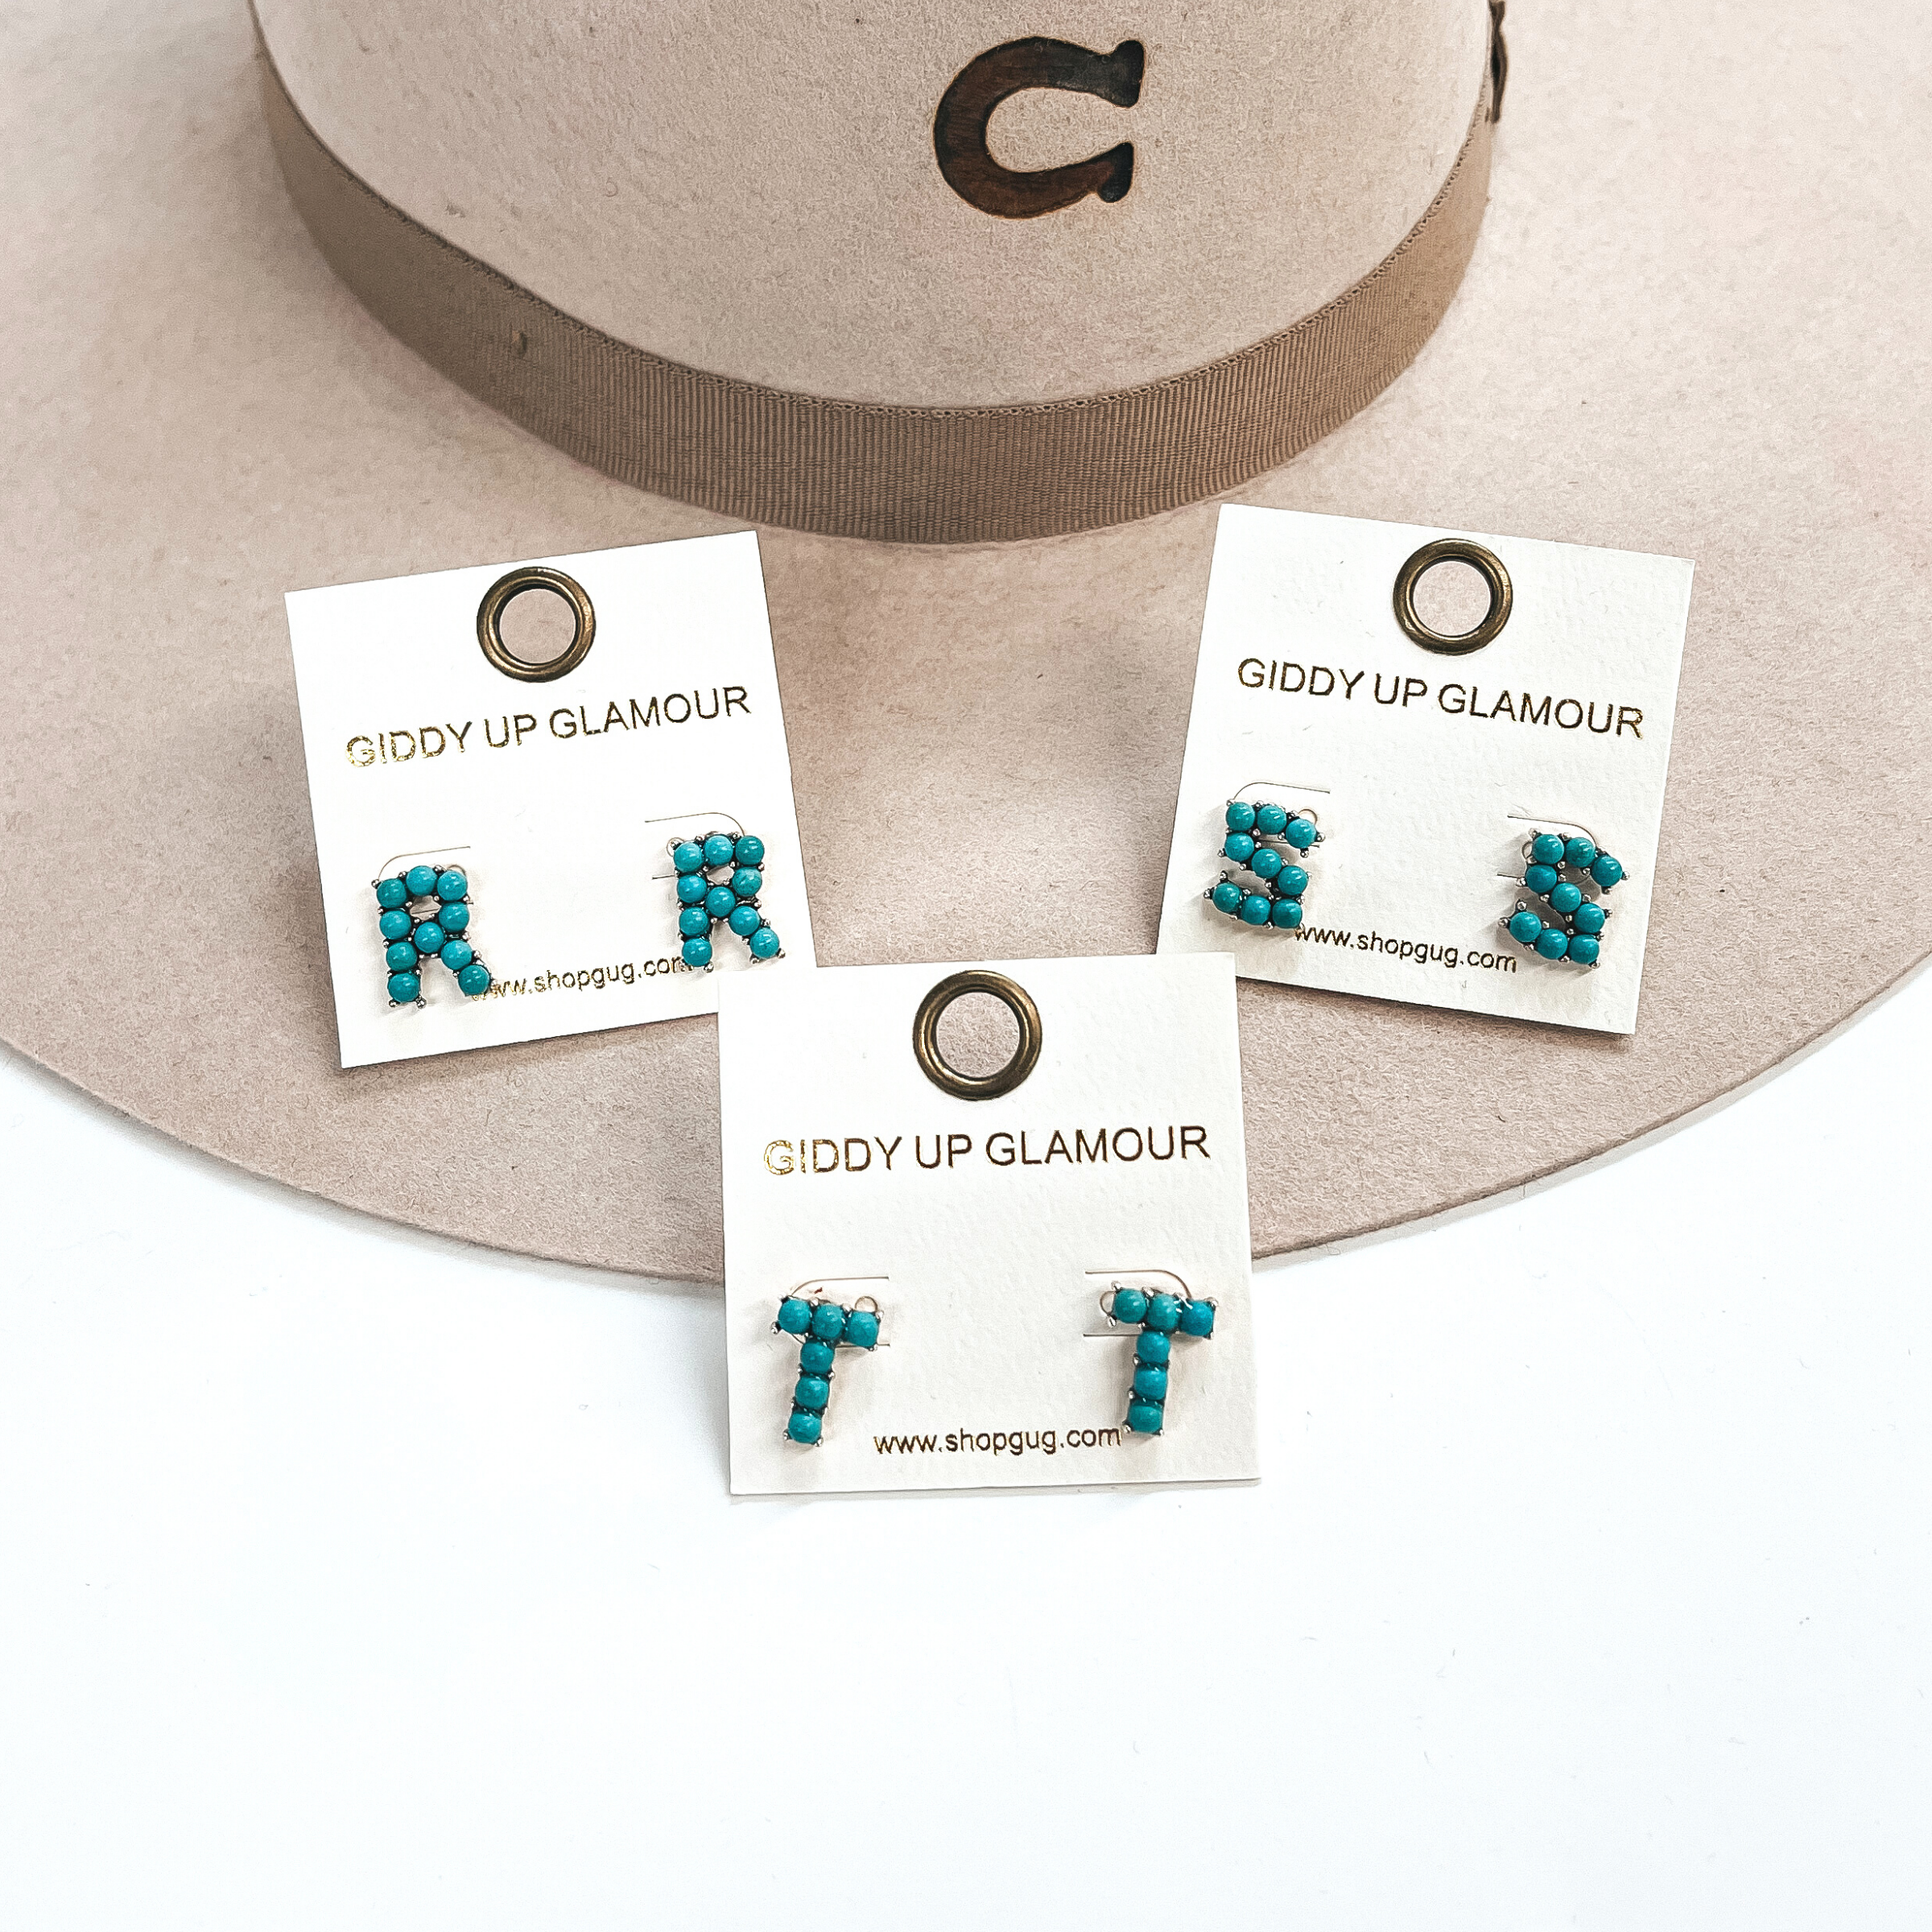 These are three pair of initial earrings with small turquoise stones in  a silver setting. From left to right; R,T,S. These earrings are placed  on a white Giddy Up Glamour card, they are laying on a beige, felt,  Charlie 1 Horse hat and on a white background.